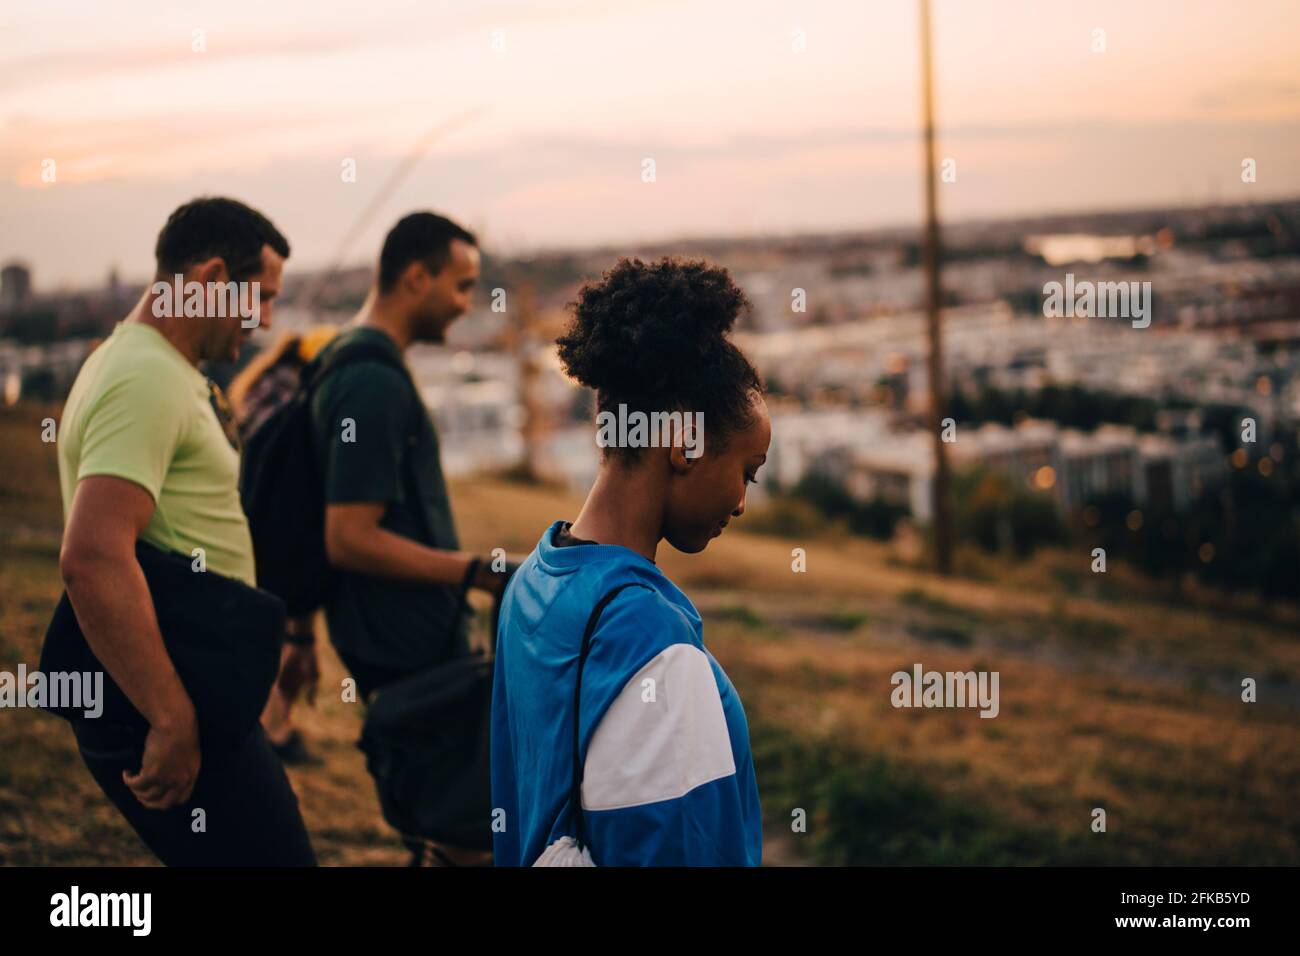 Male and female athletes standing on land during sunset Stock Photo